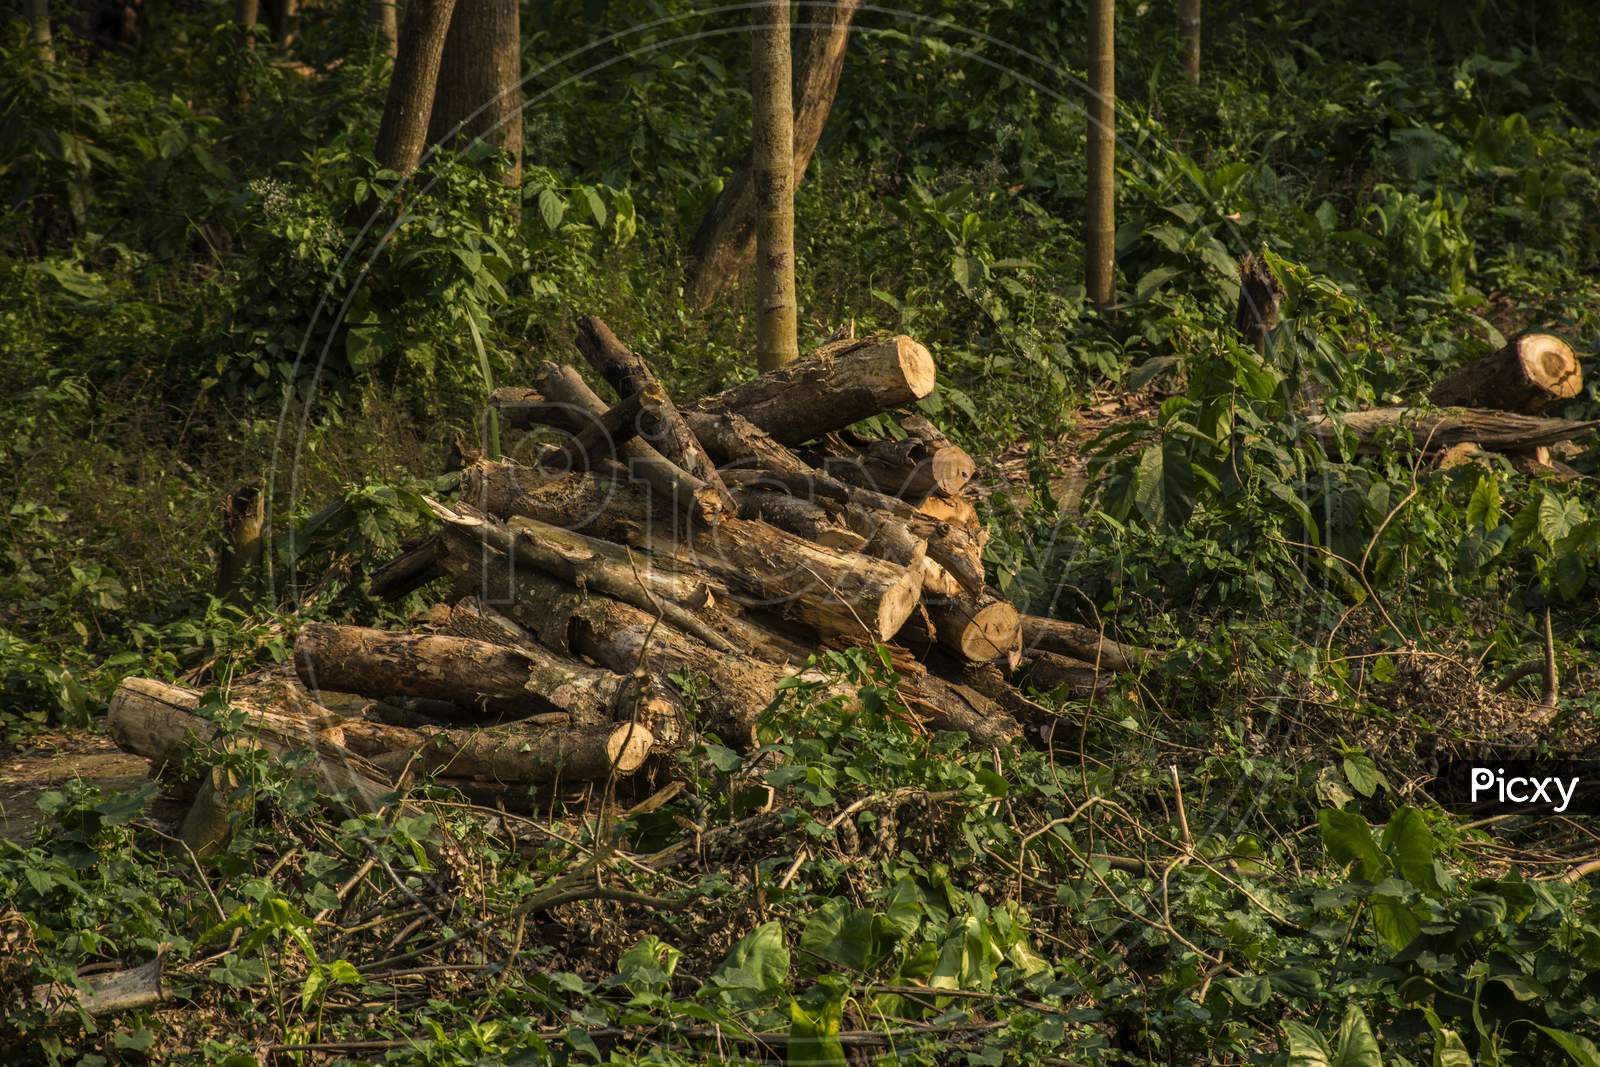 Cut Tree Stumps And Logs Show That Deforestation Engendering Environment.